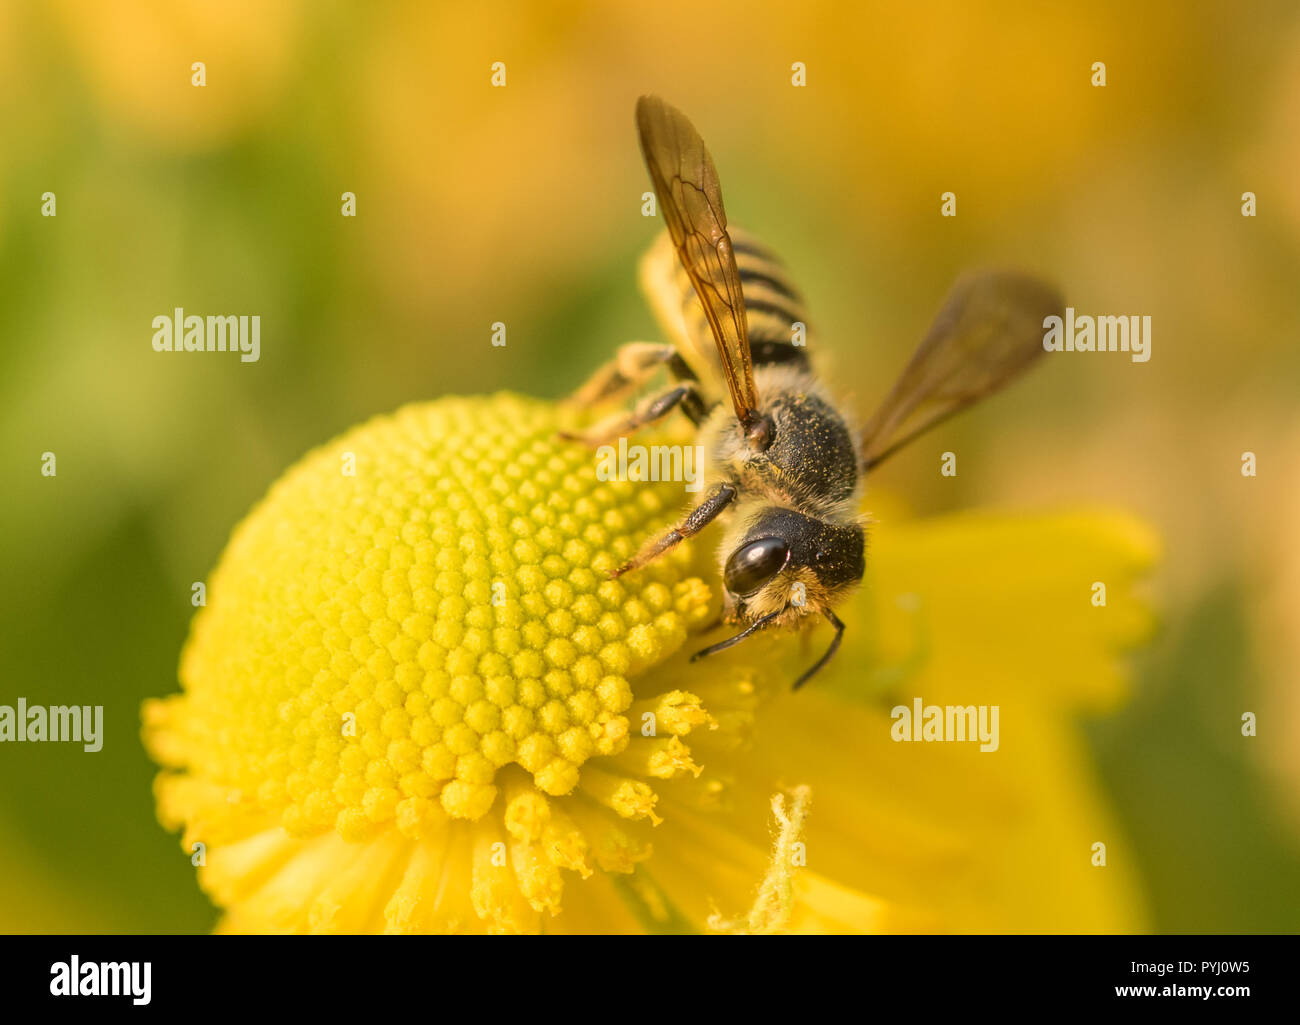 A solitary Leafcutter Bee (Megachile) gathering nectar and pollen from a yellow Sneezeweed flower (Helenium autumnale) Stock Photo